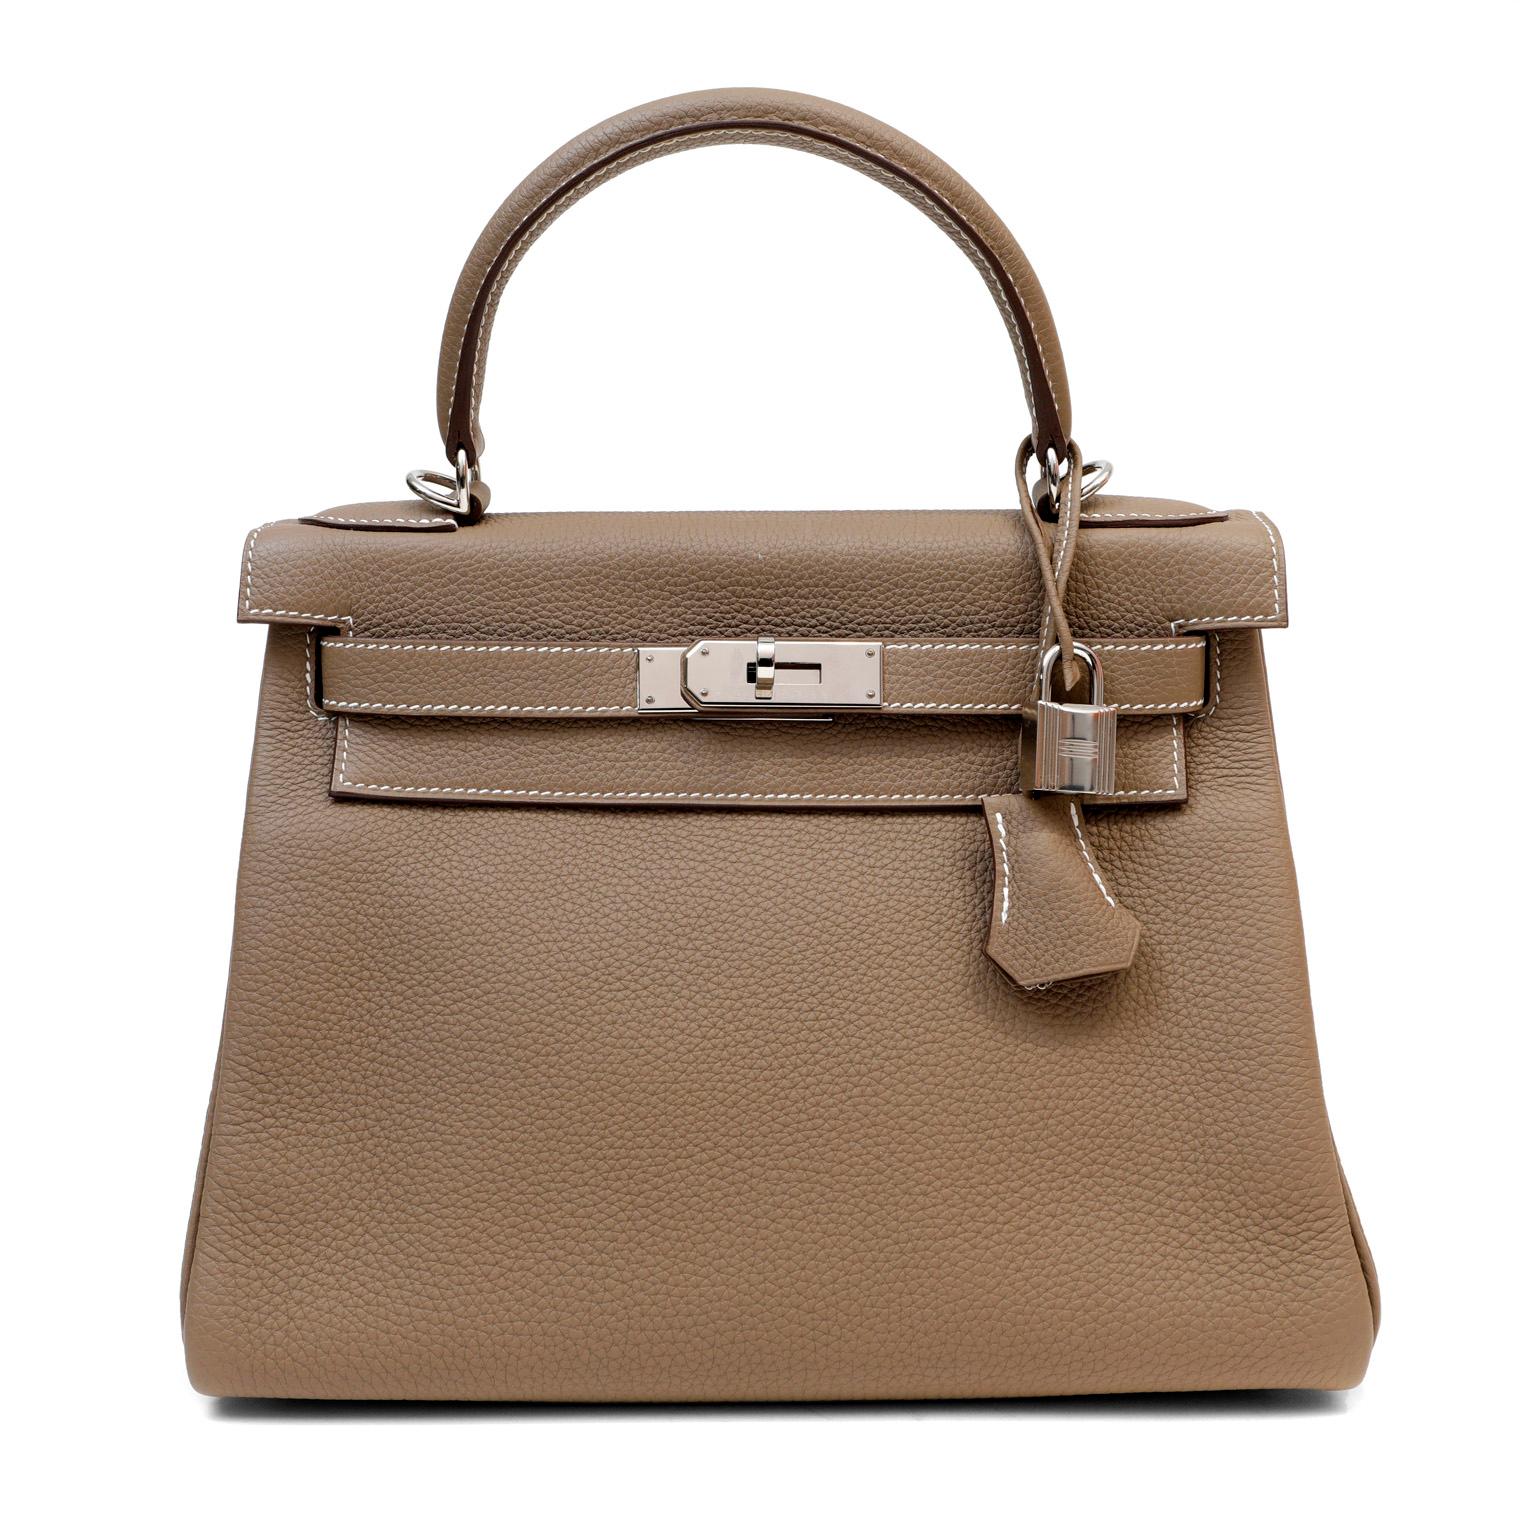 This authentic Hermès Greige Togo 28 cm Kelly is in excellent plus condition.  Hermès bags are considered the ultimate luxury item worldwide.  Each piece is handcrafted with waitlists that can exceed a year or more.  The ladylike Kelly is classic